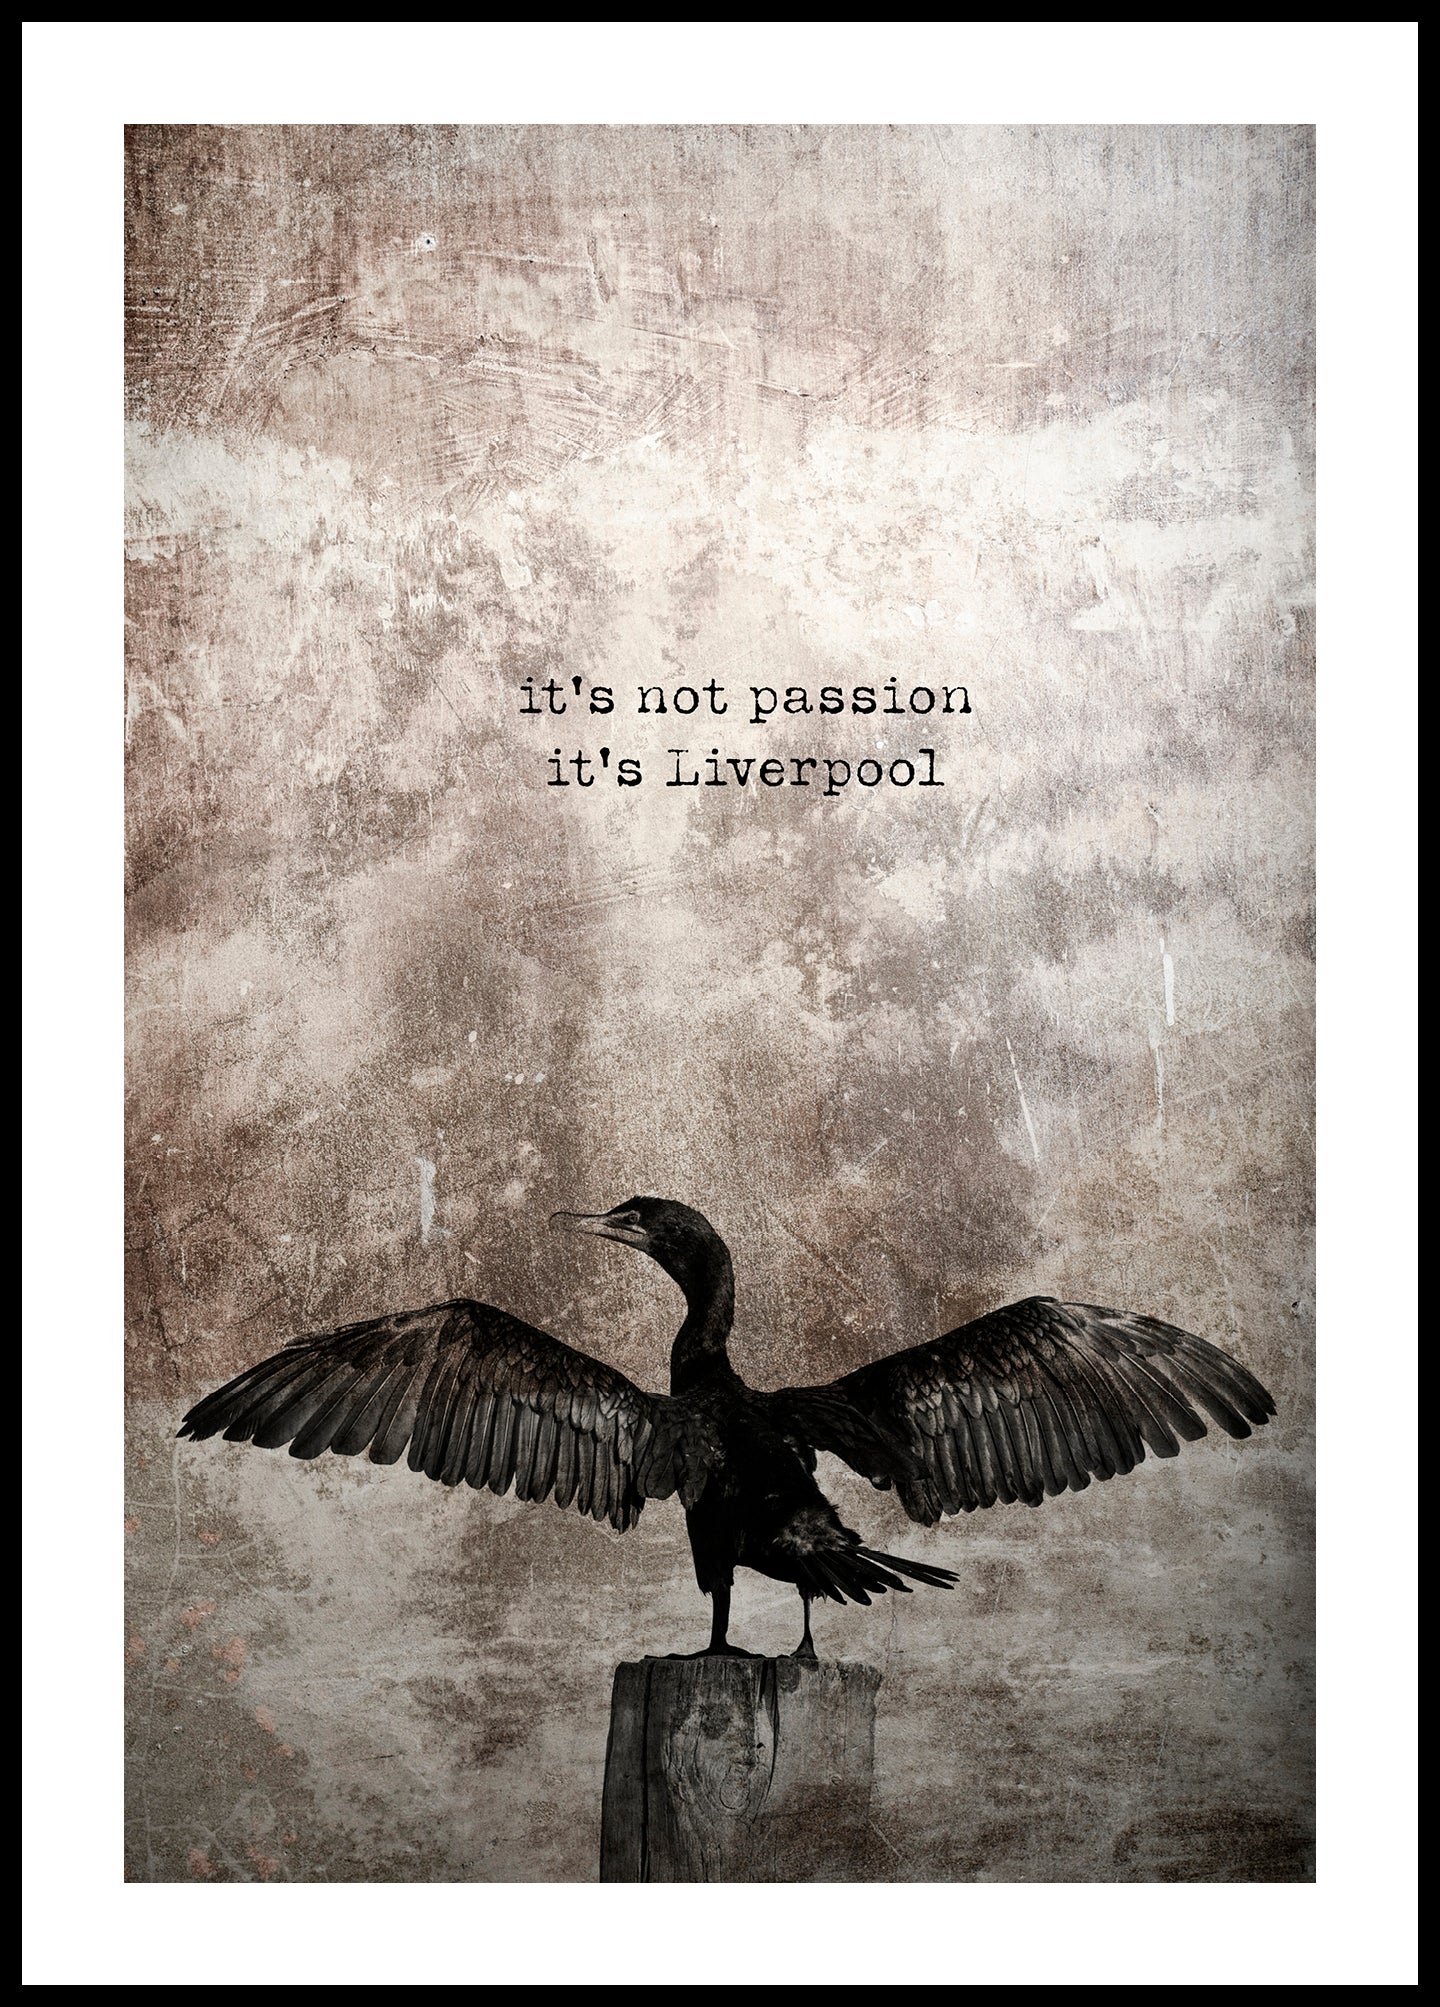 It's Liverpool poster